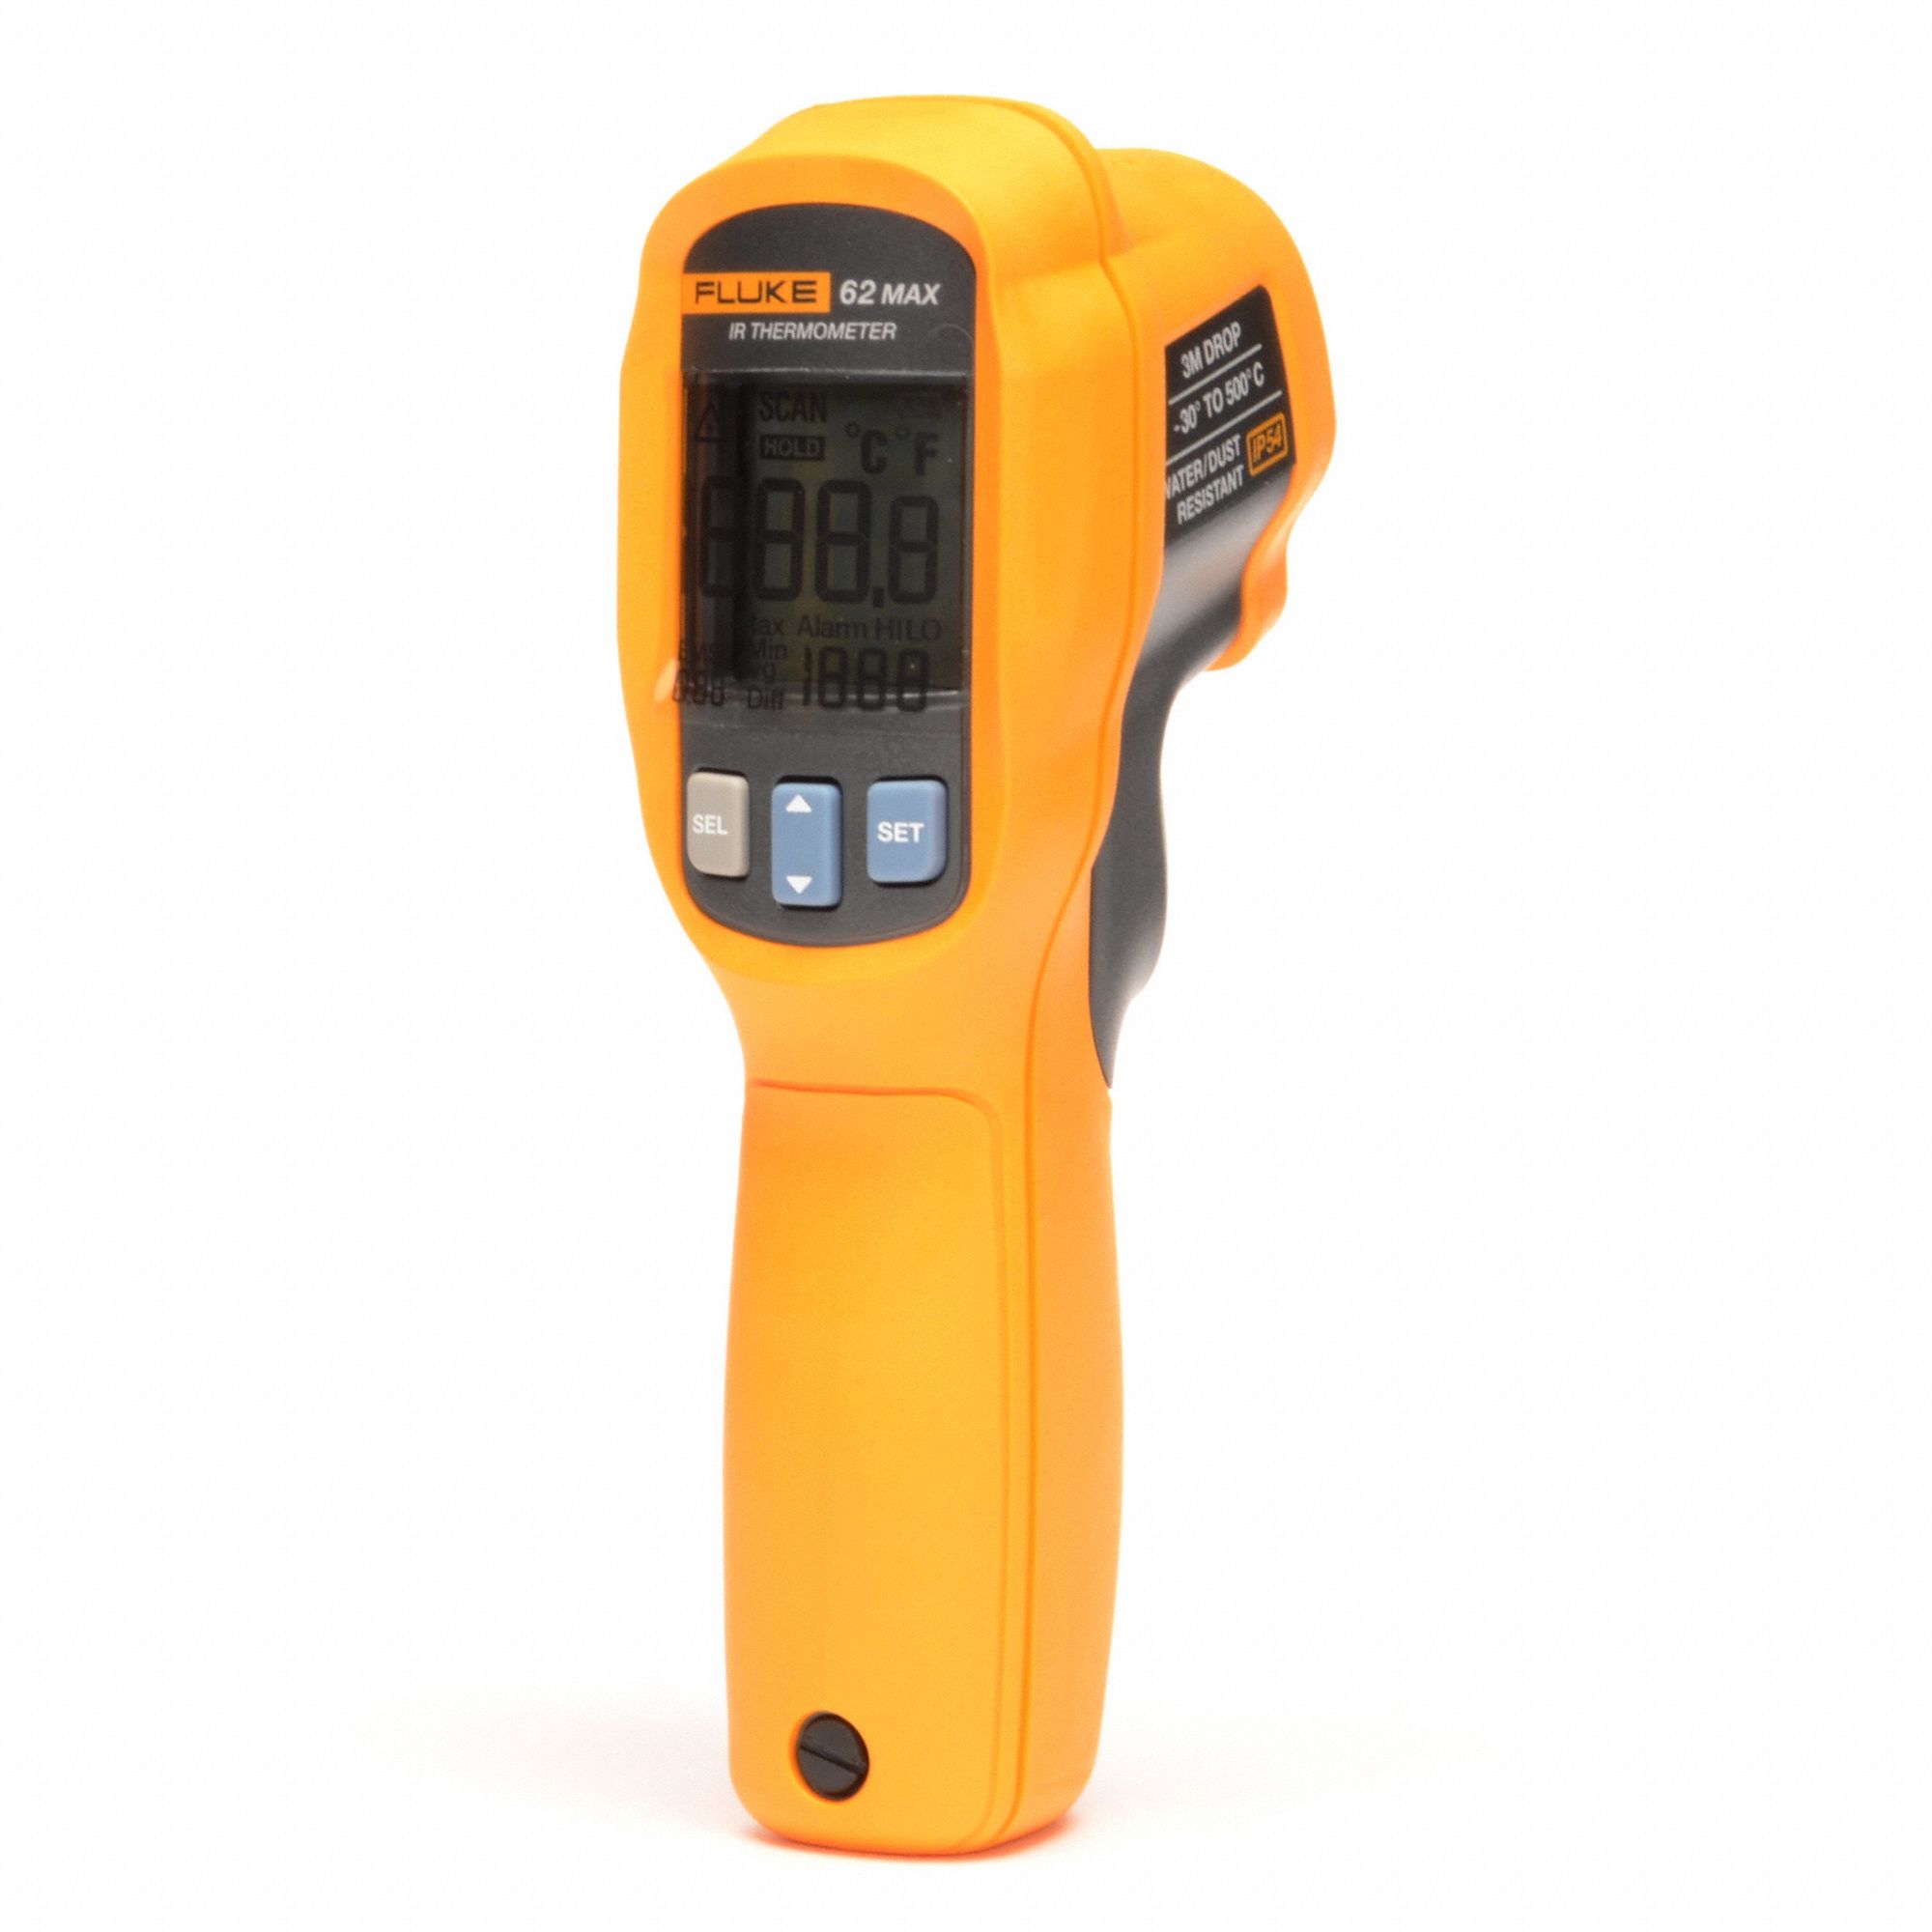 PRISMATIC INFRARED THERMOMETER, SE-422